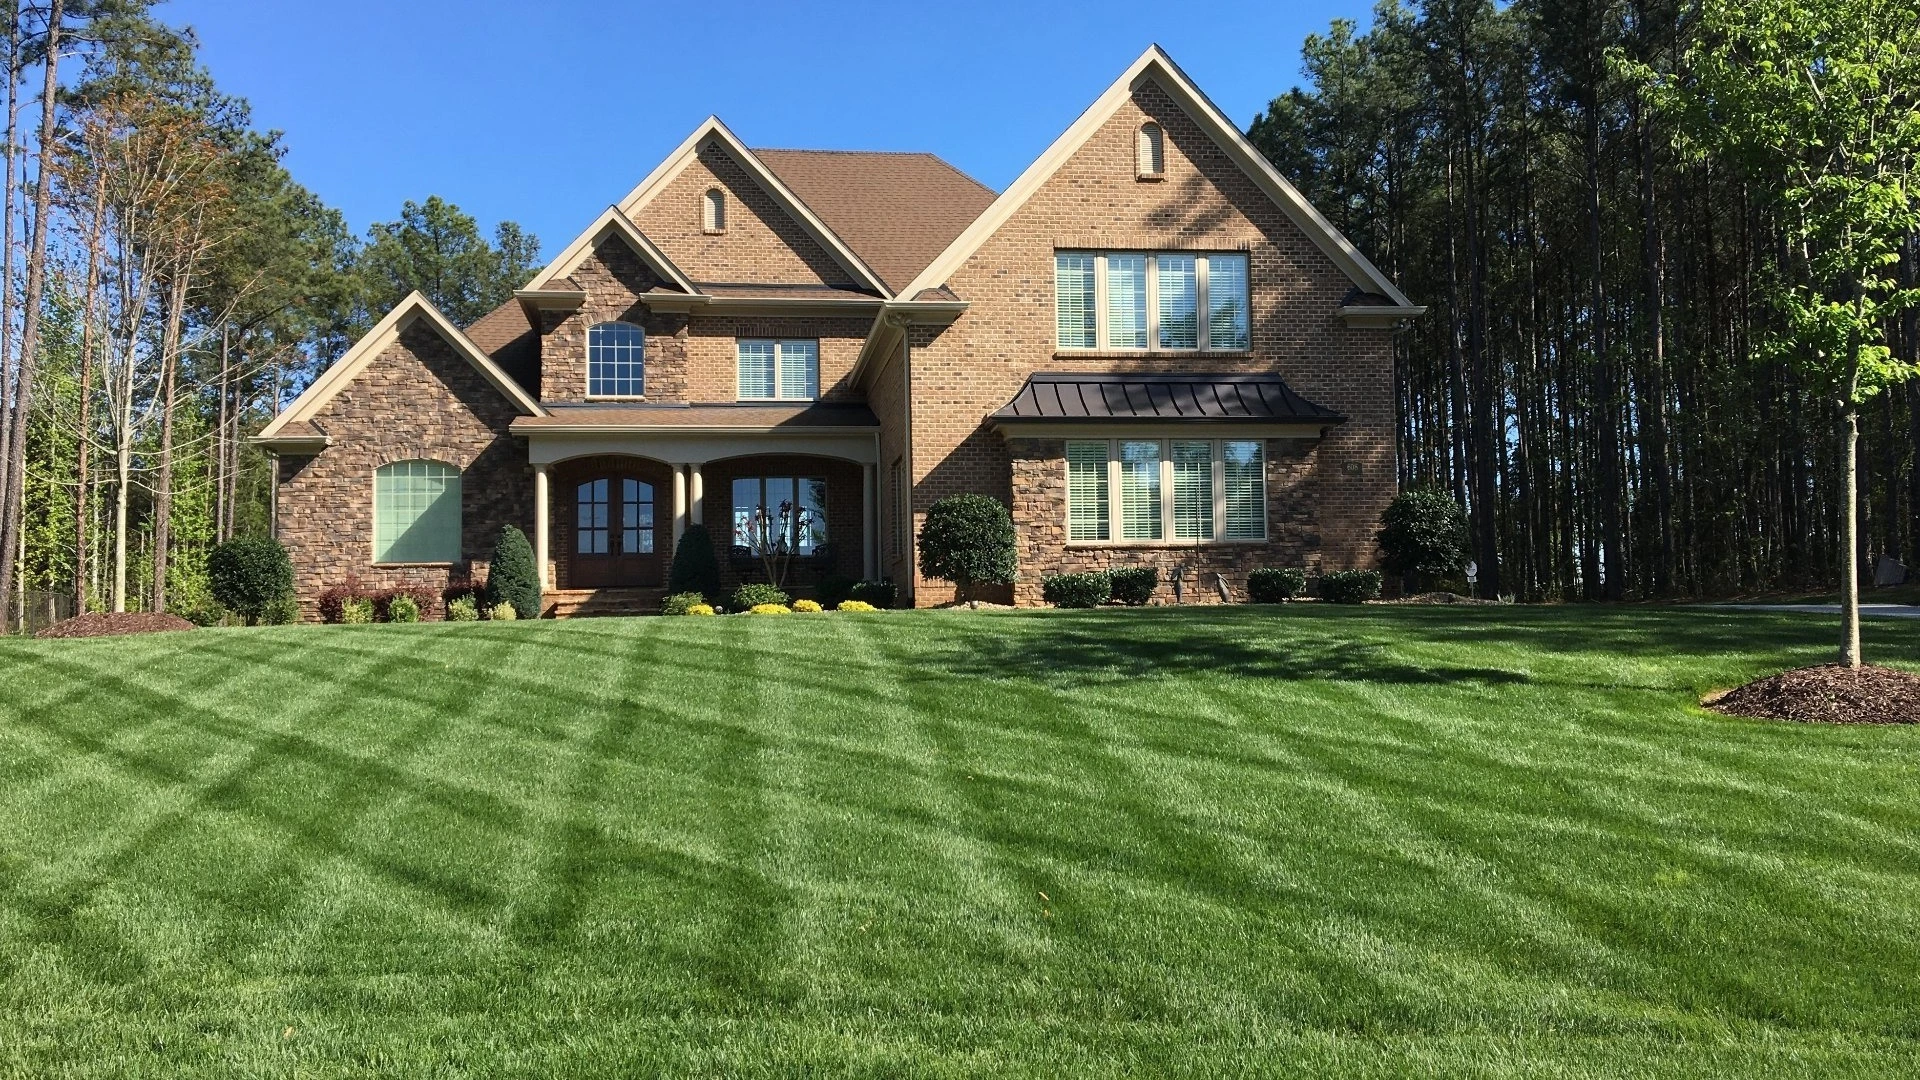 Home in Charlotte, NC with a perfect front lawn.